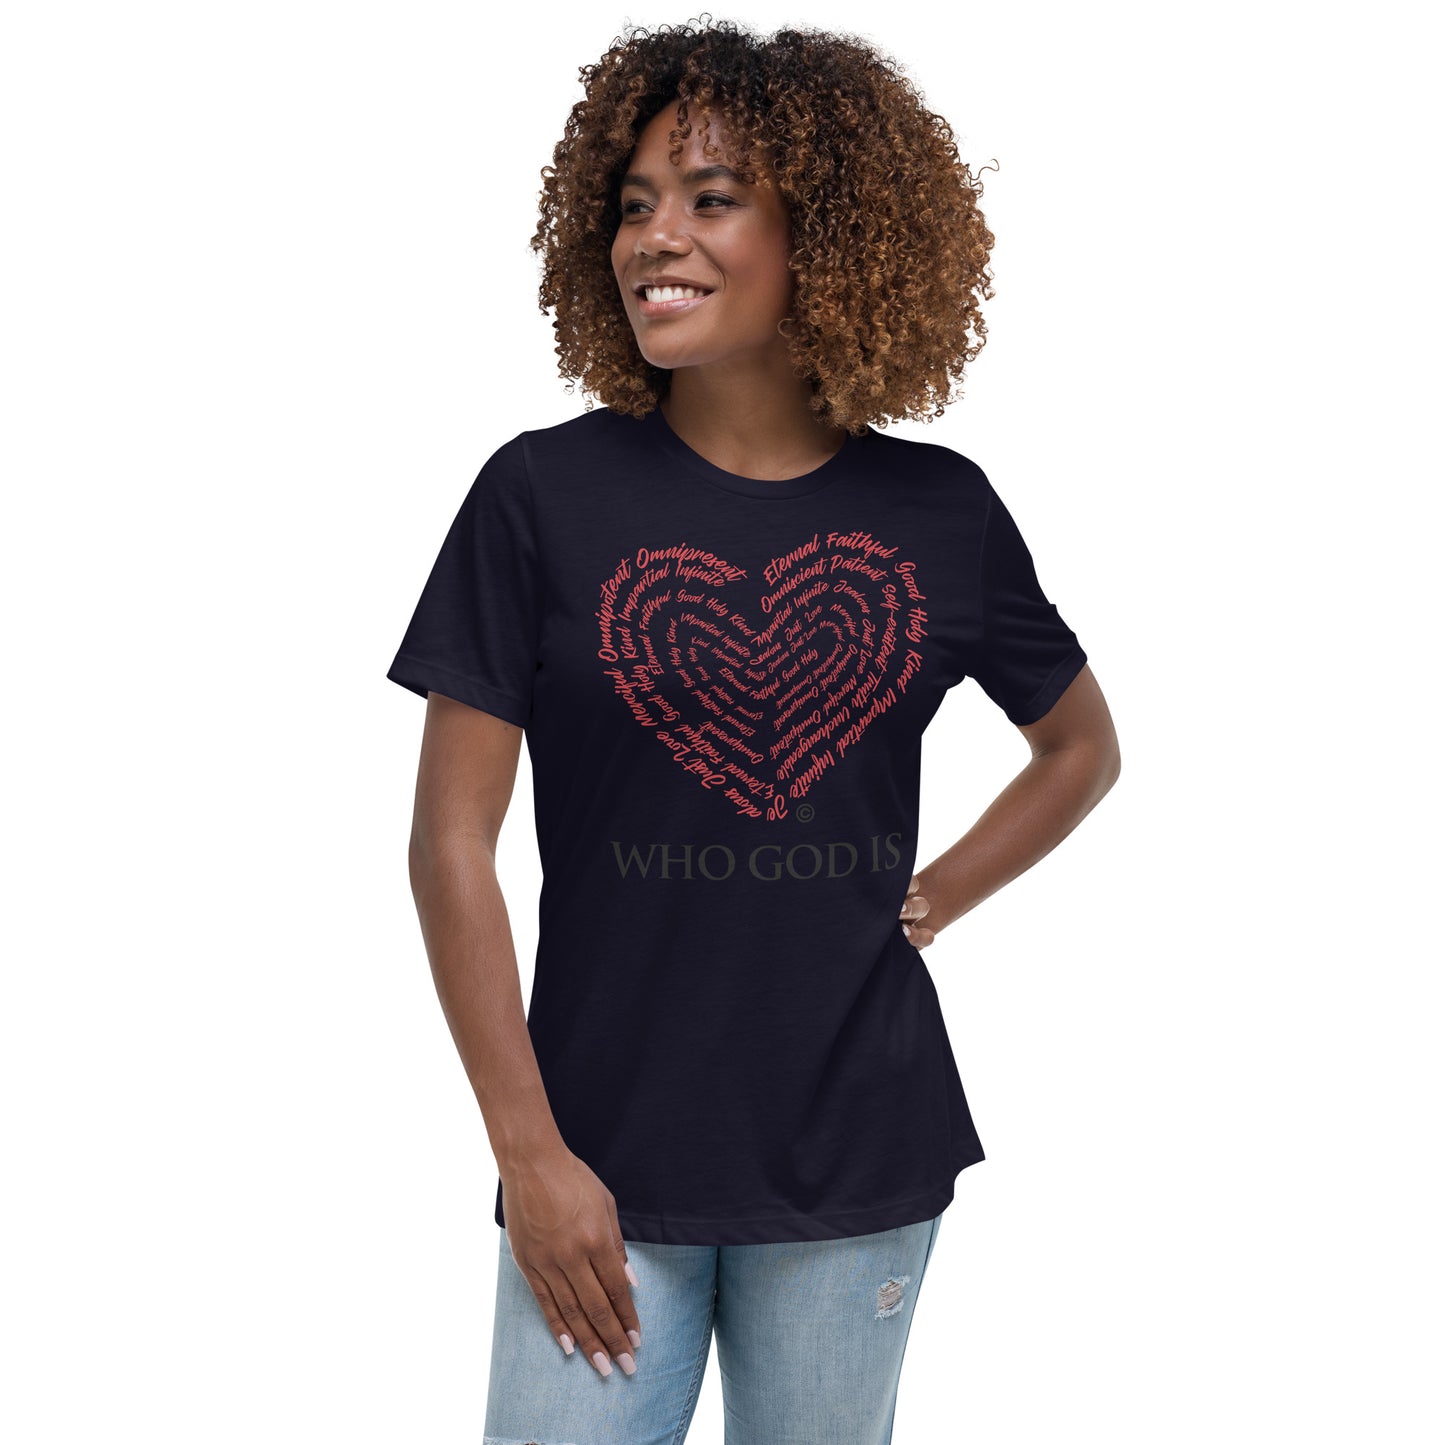 Who God Is Dark-Colored Women's Relaxed T-Shirt